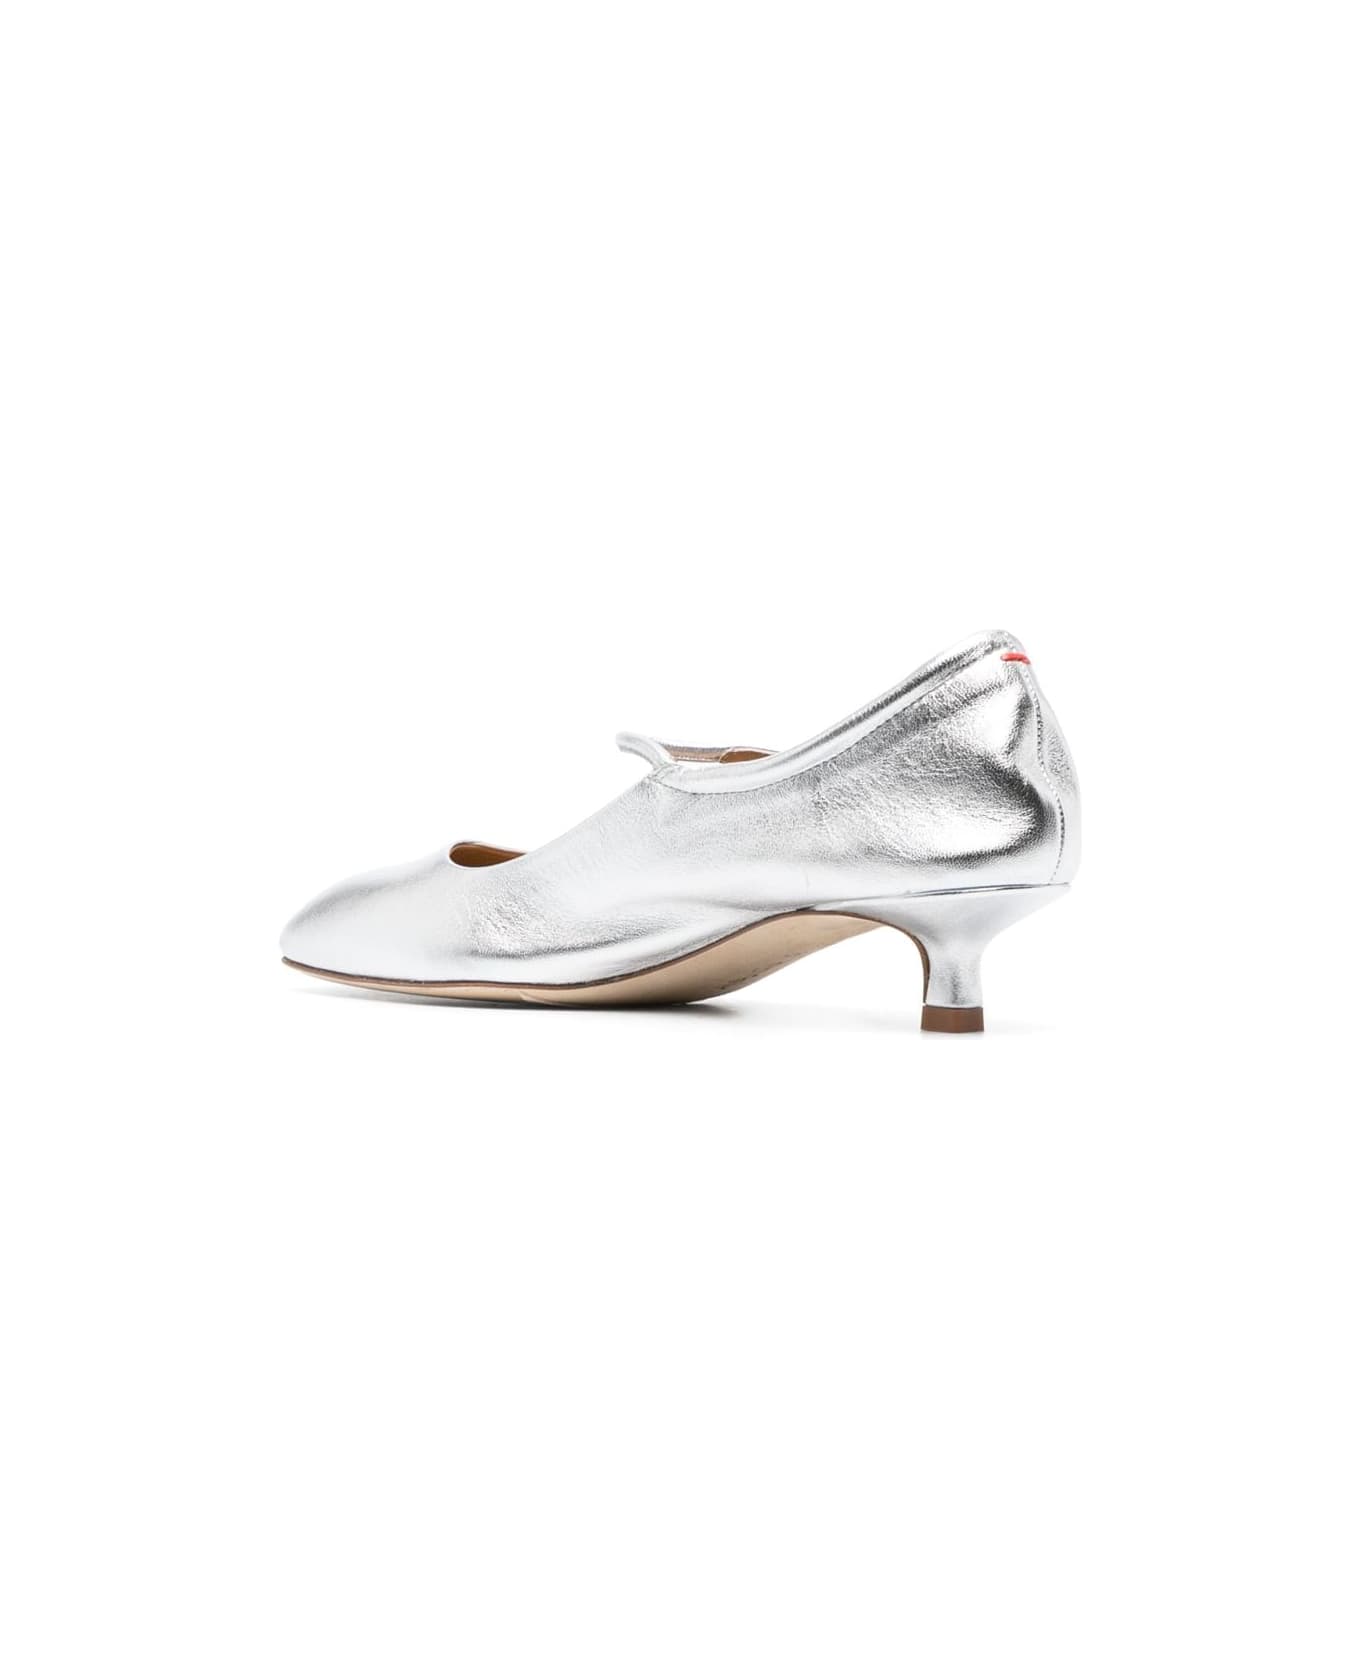 aeyde Ines Laminated Nappa Leather Silver - Silver